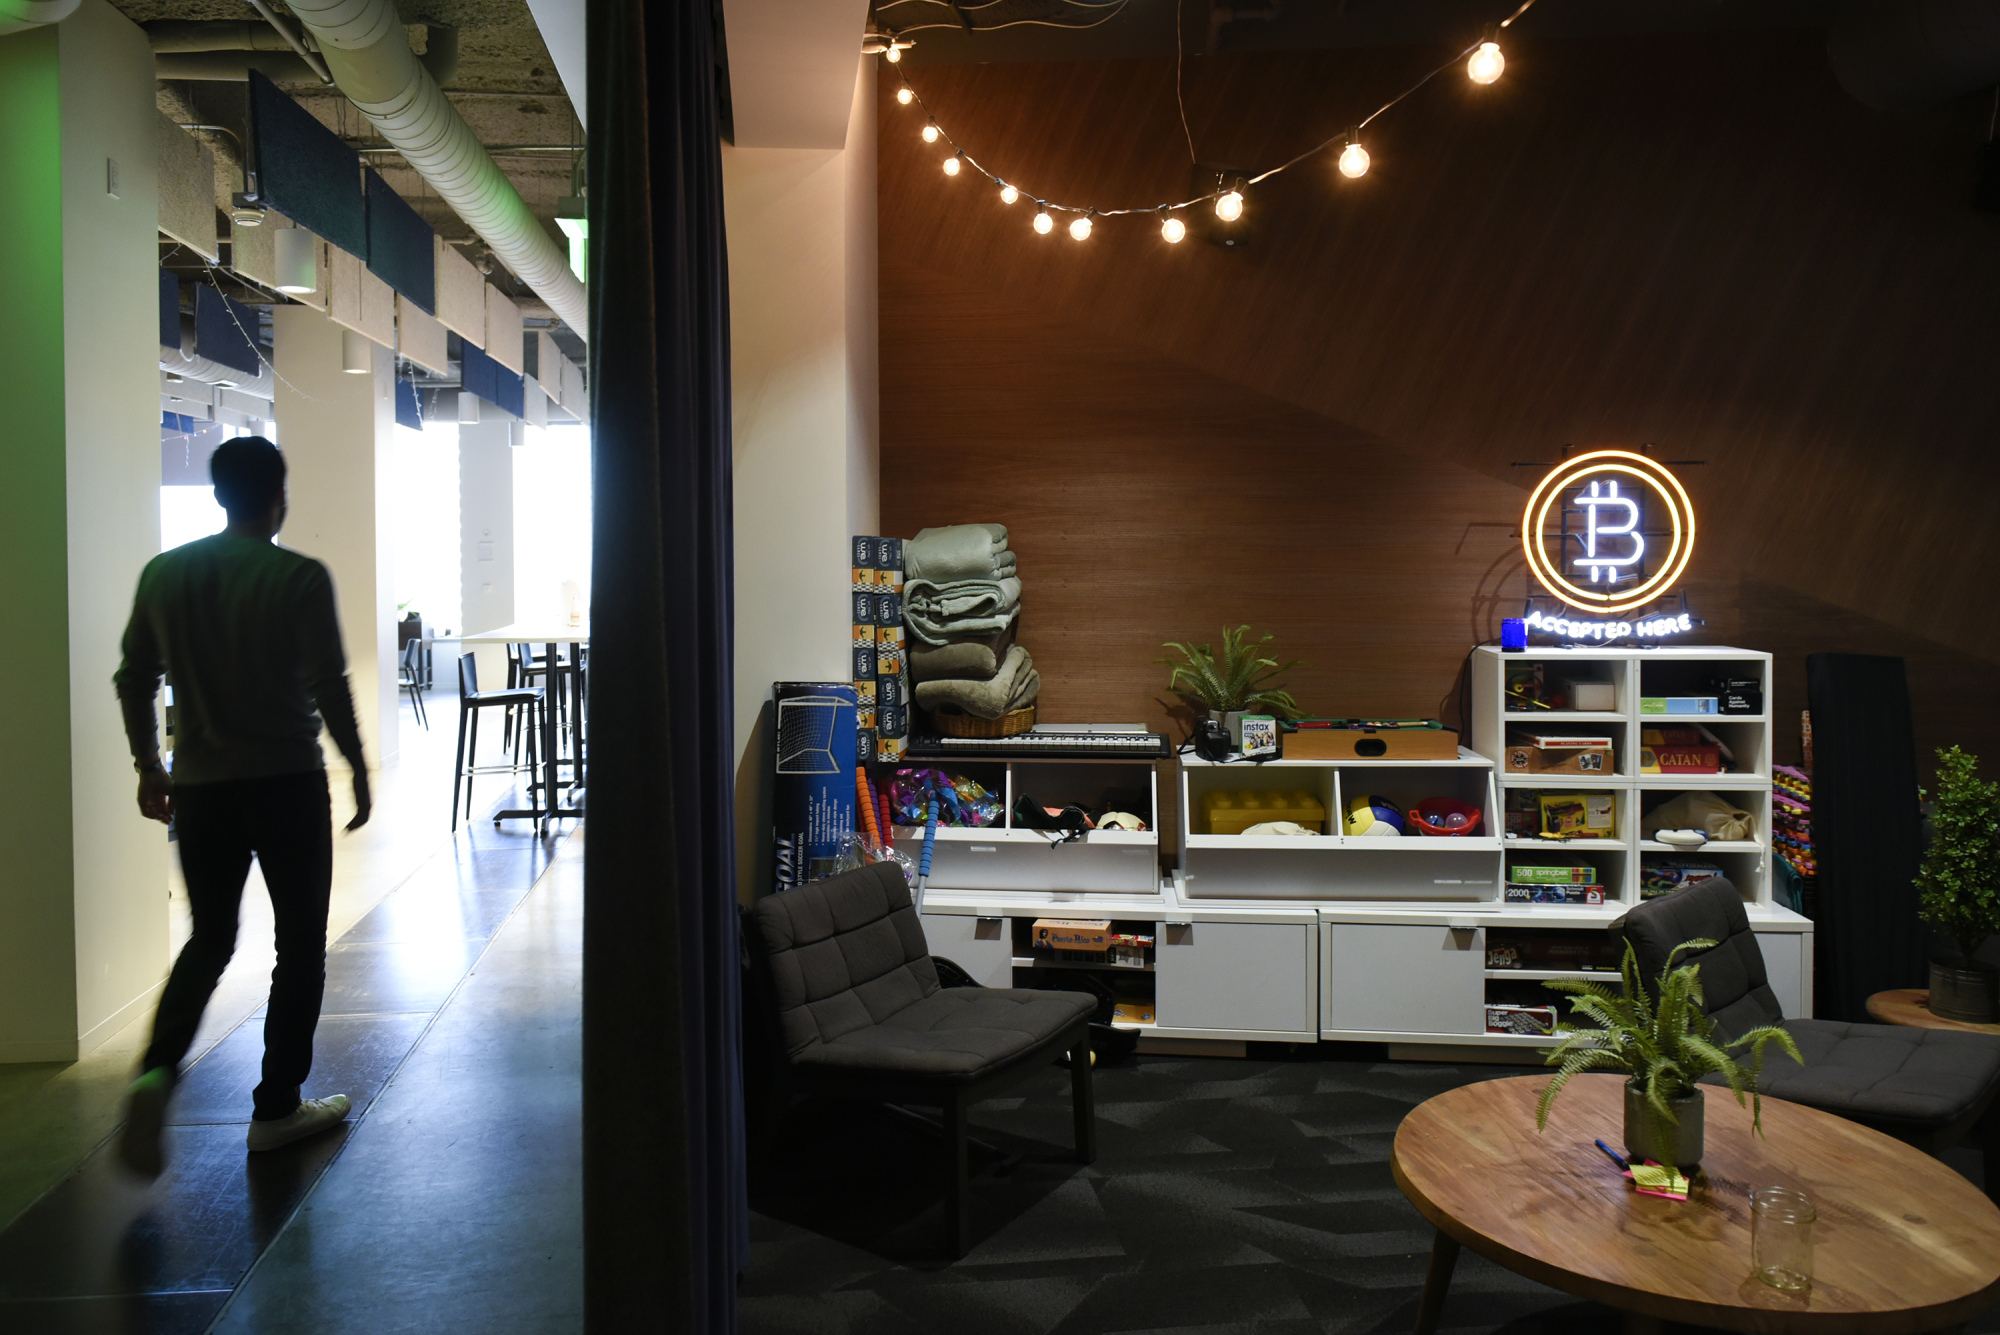 A Bitcoin neon sign is displayed in a lounge area at the Coinbase office in San Francisco.